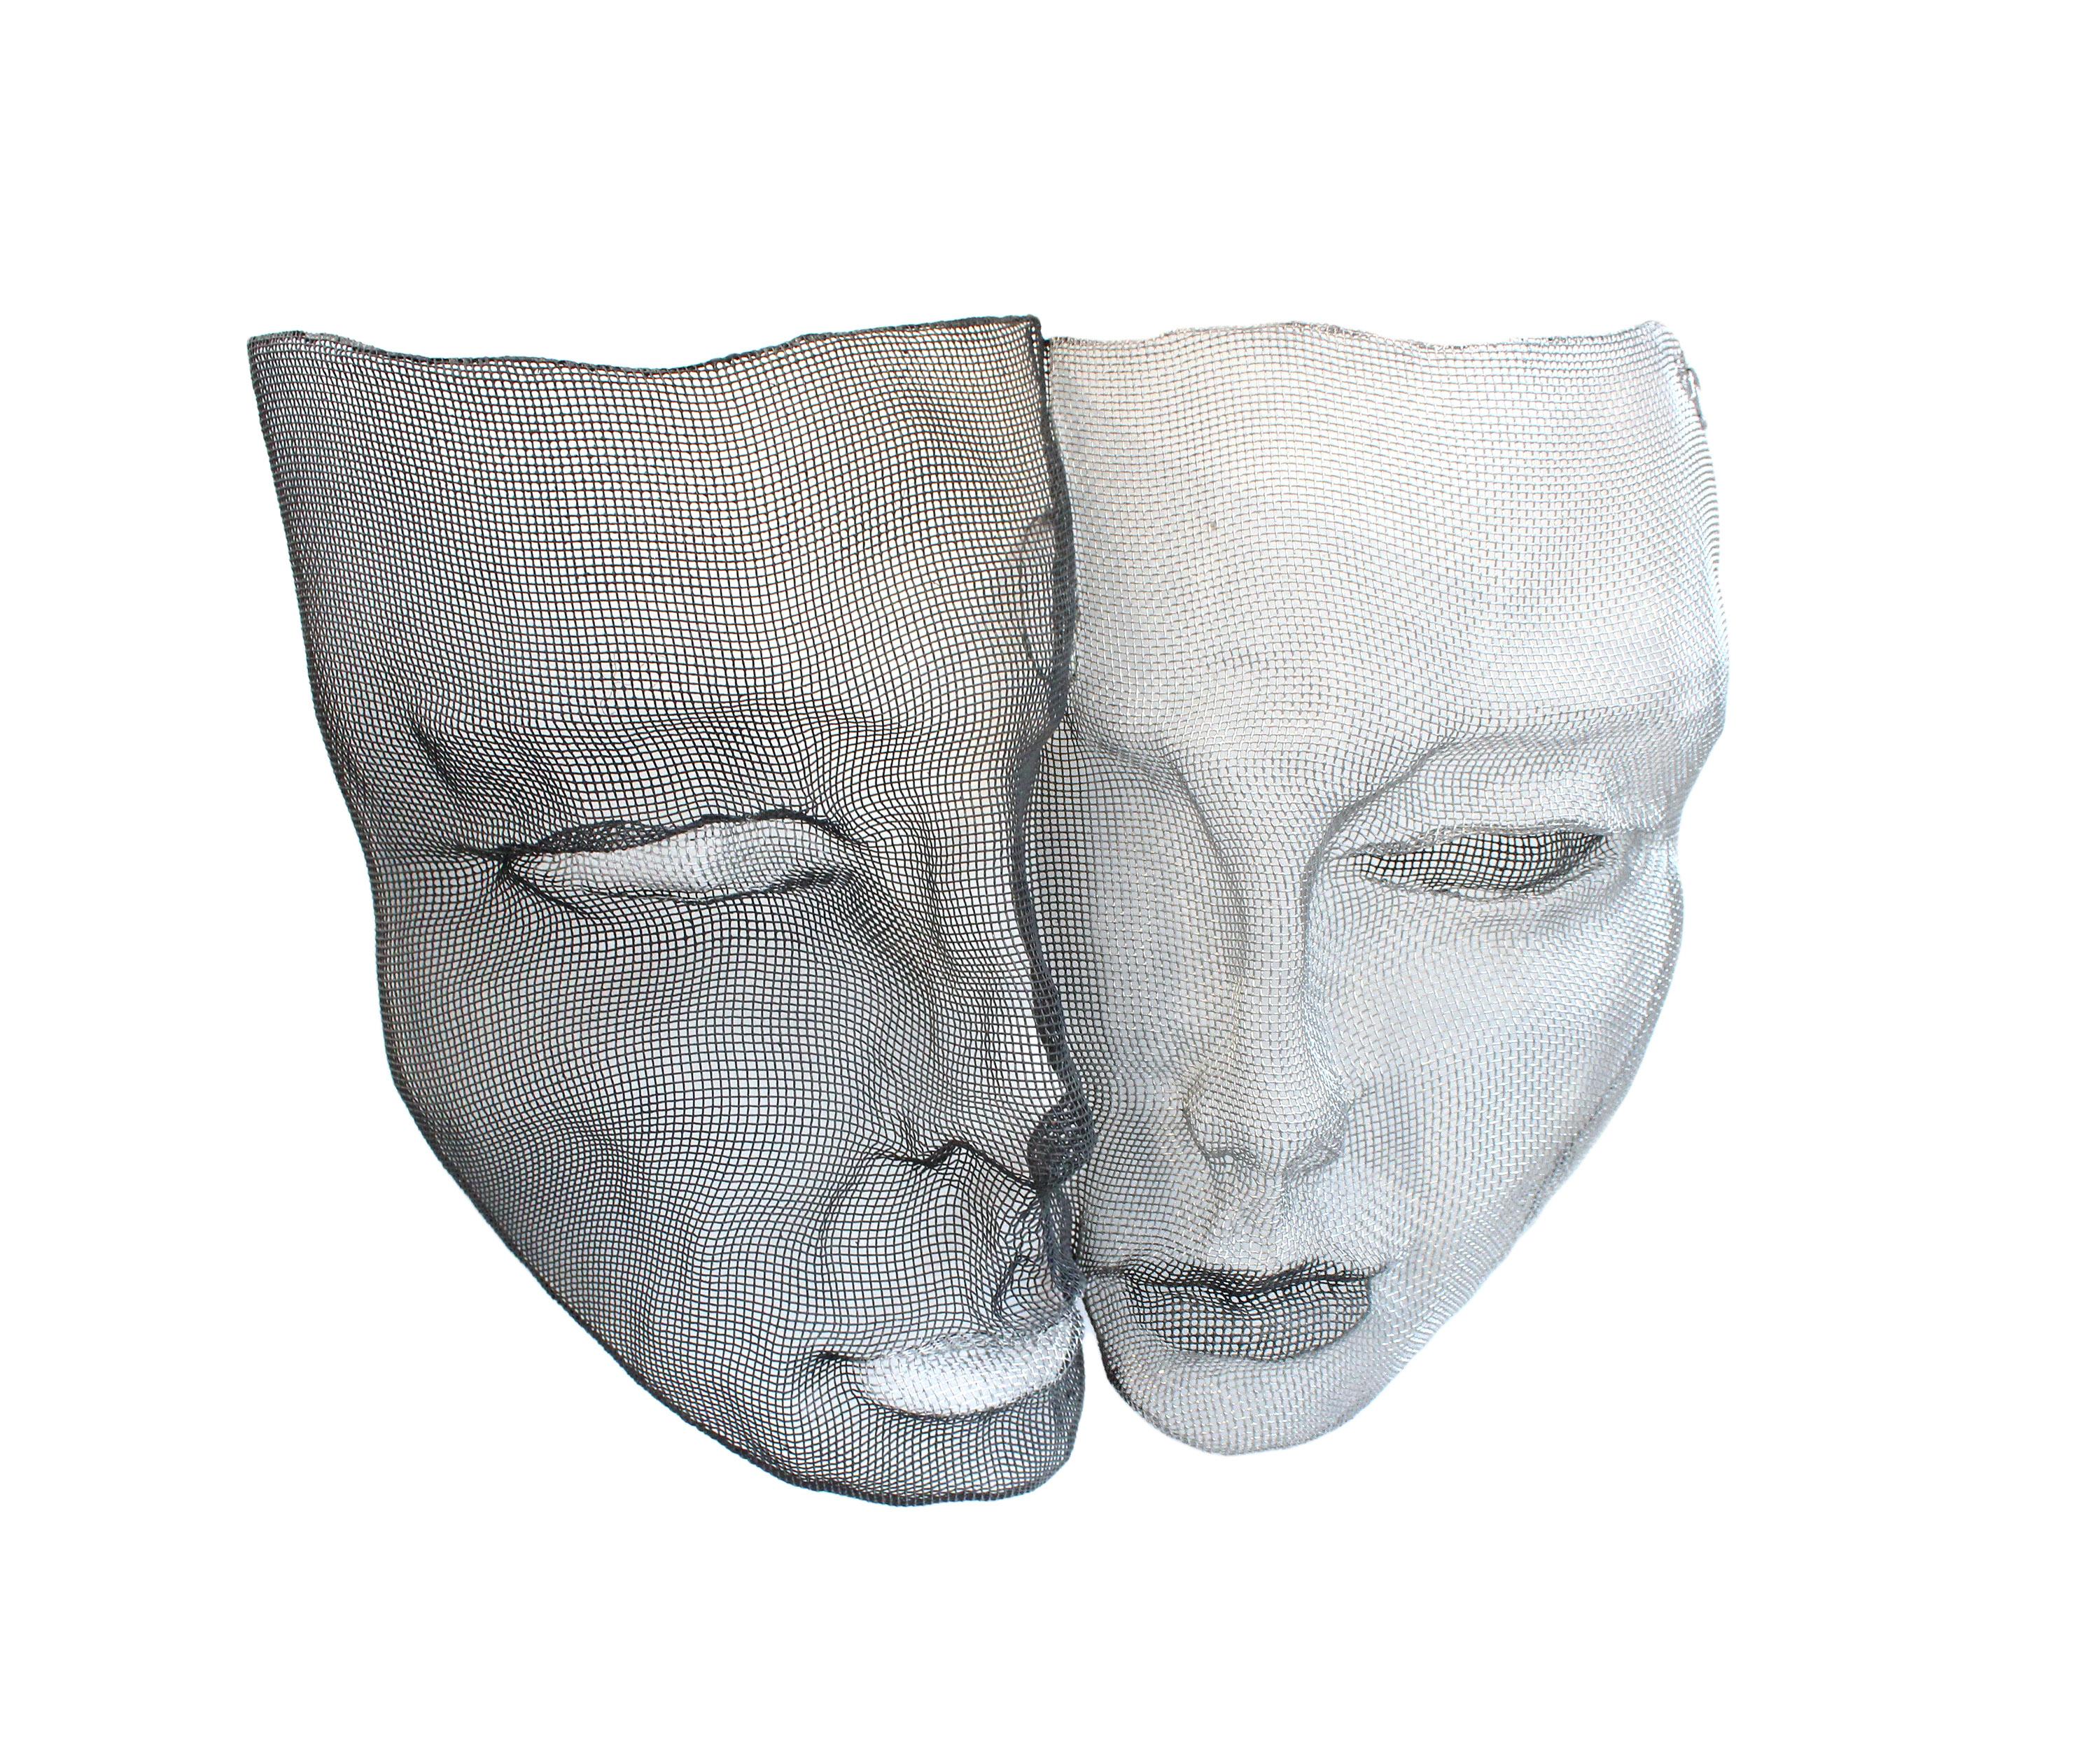 Black and White Face, Mesh Sculpture